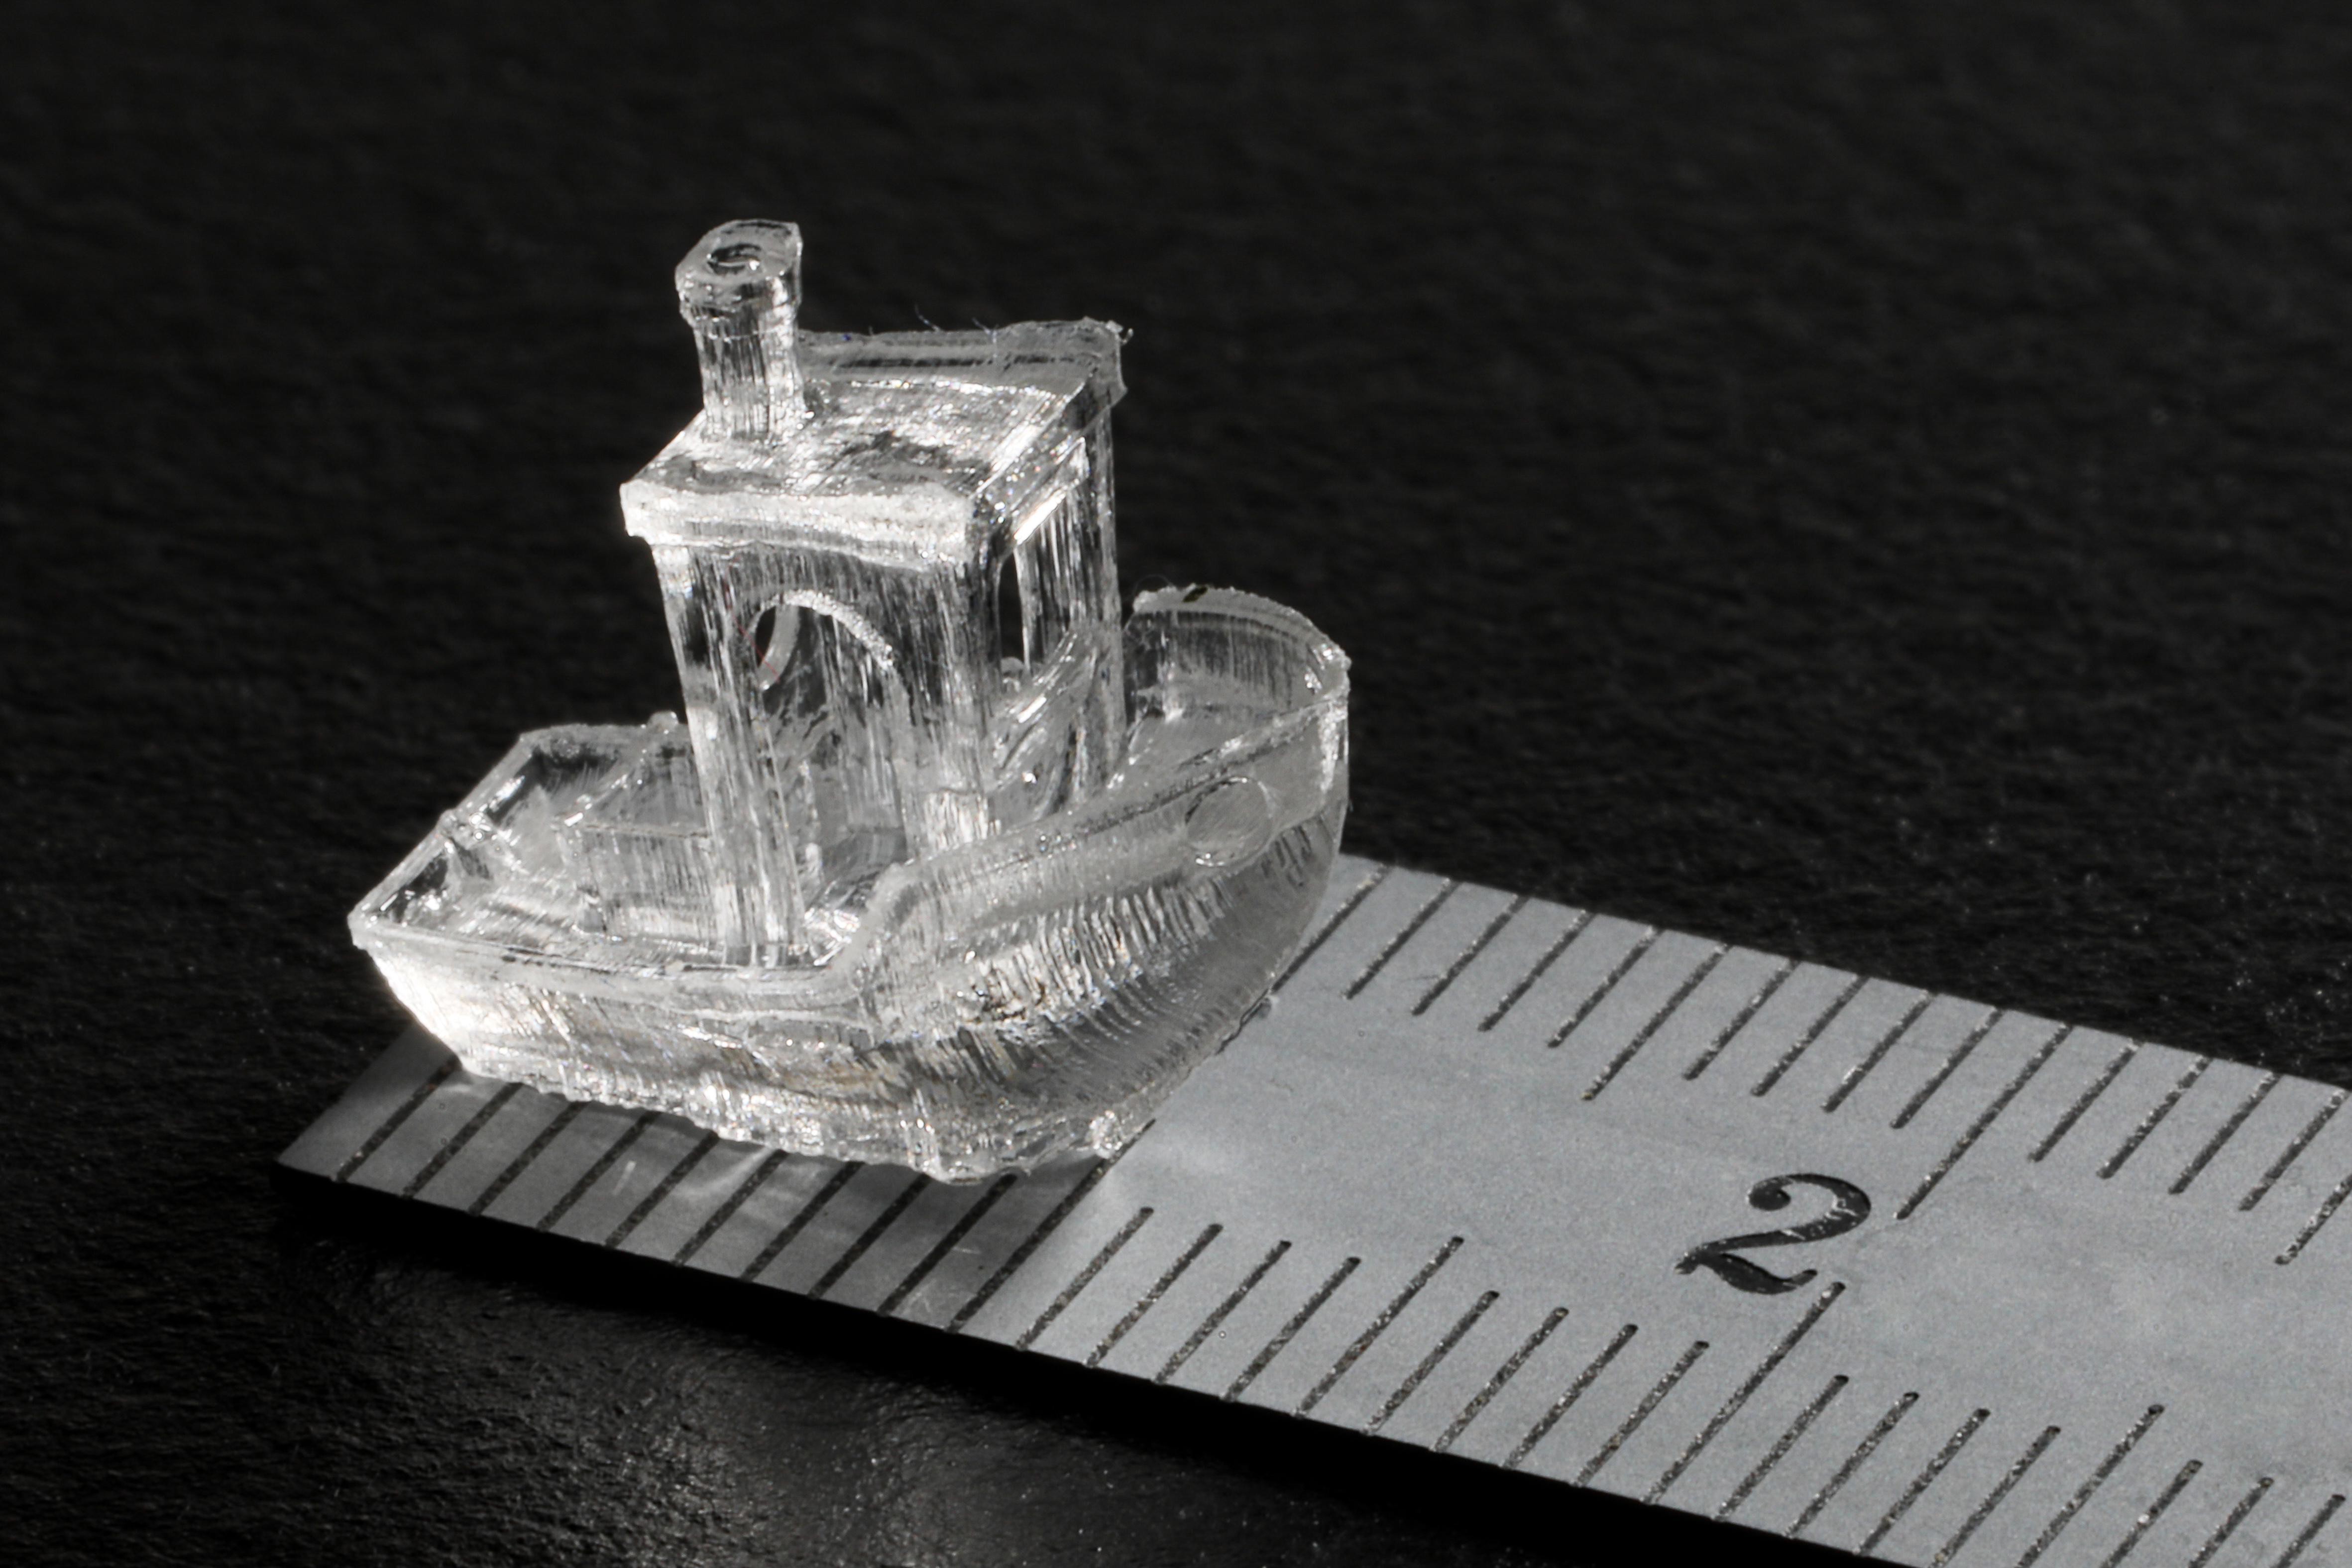 Rotational 3D Printing Creates Complex Models in Seconds